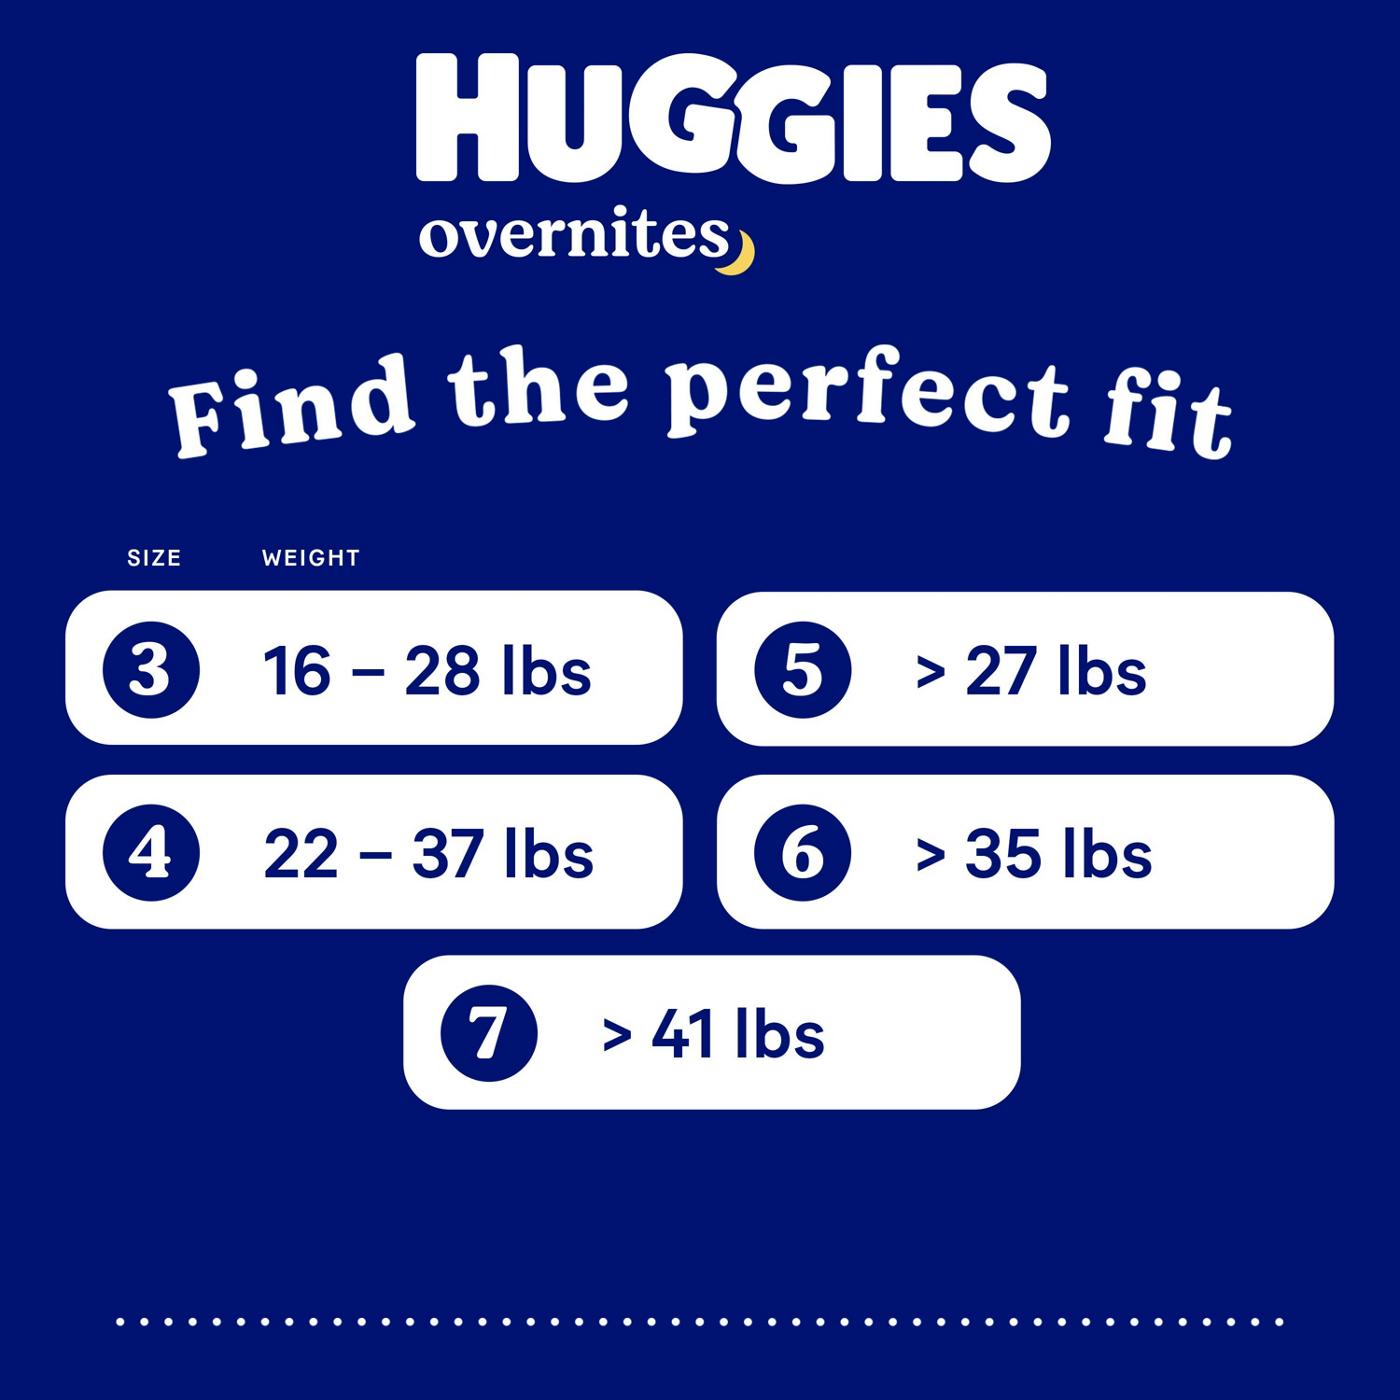 Huggies Overnites Nighttime Baby Diapers - Size 5; image 6 of 8